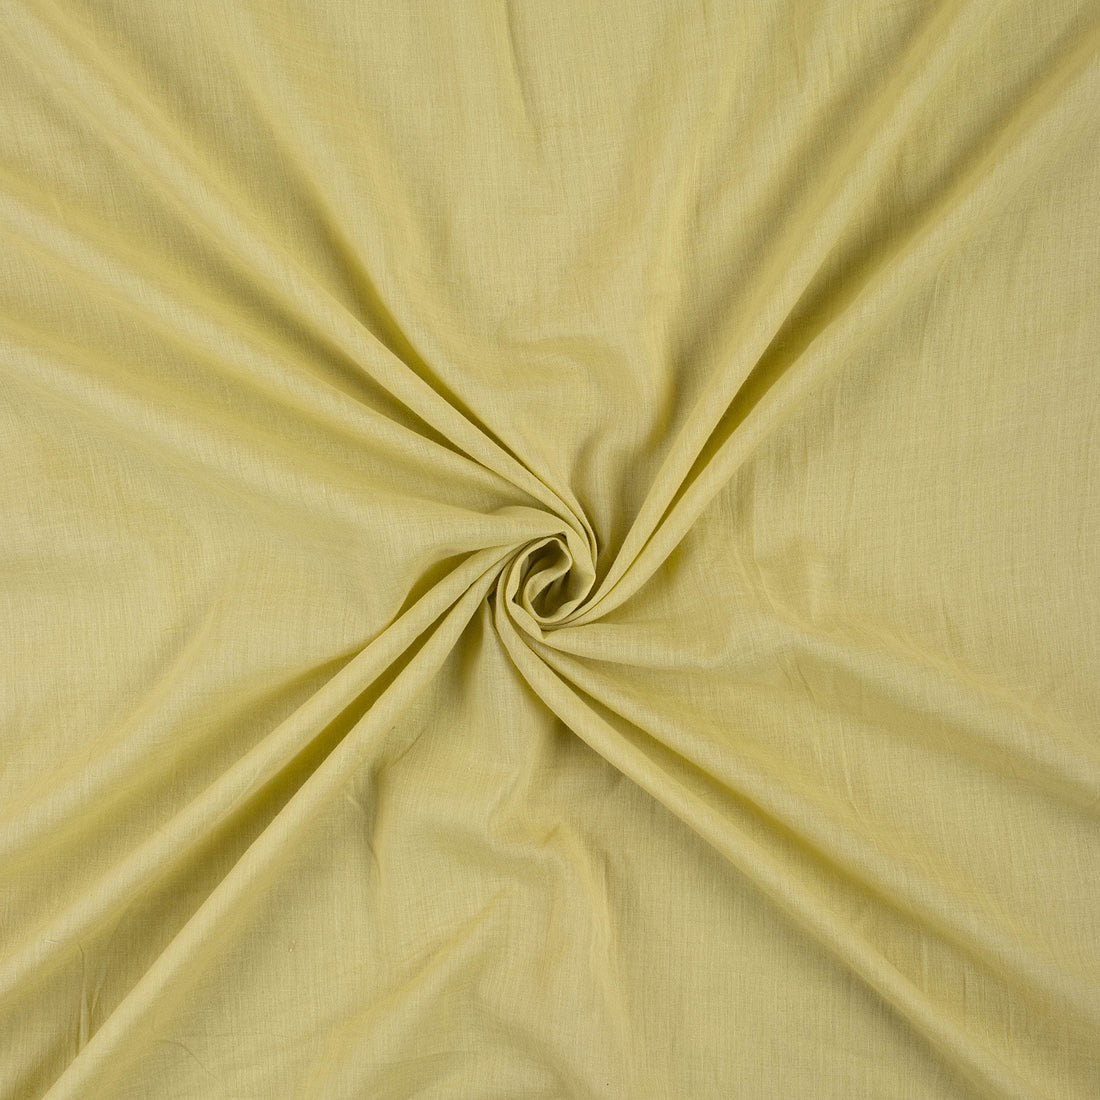 Cream Pure Cotton Natural Dyed Plain Fabric